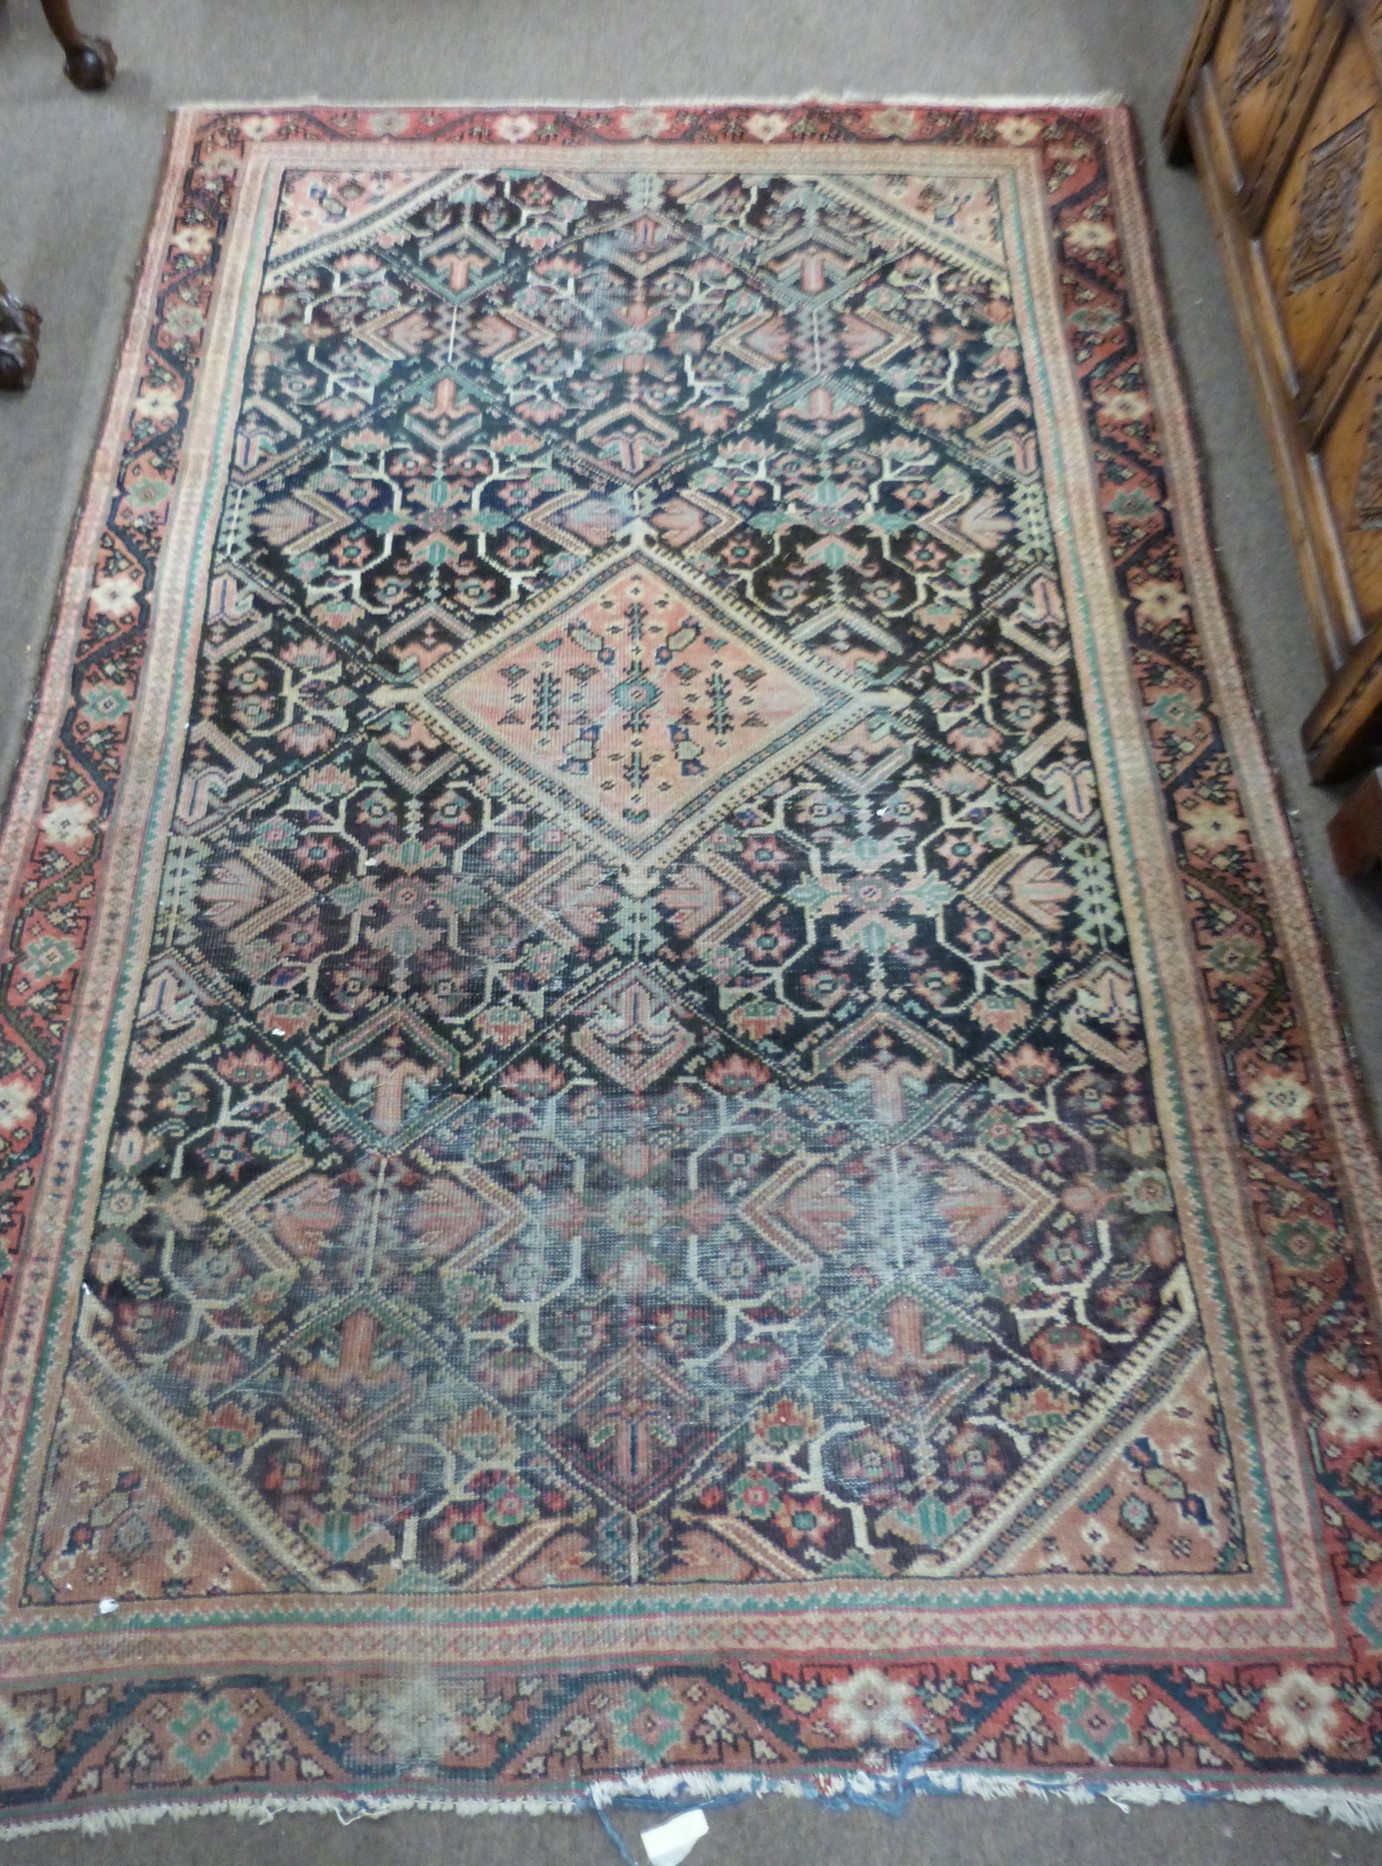 Small Caucasian rug, blue and red ground, triple gulled border, 6ft 5" x 4", (faded/worn) - Image 2 of 2